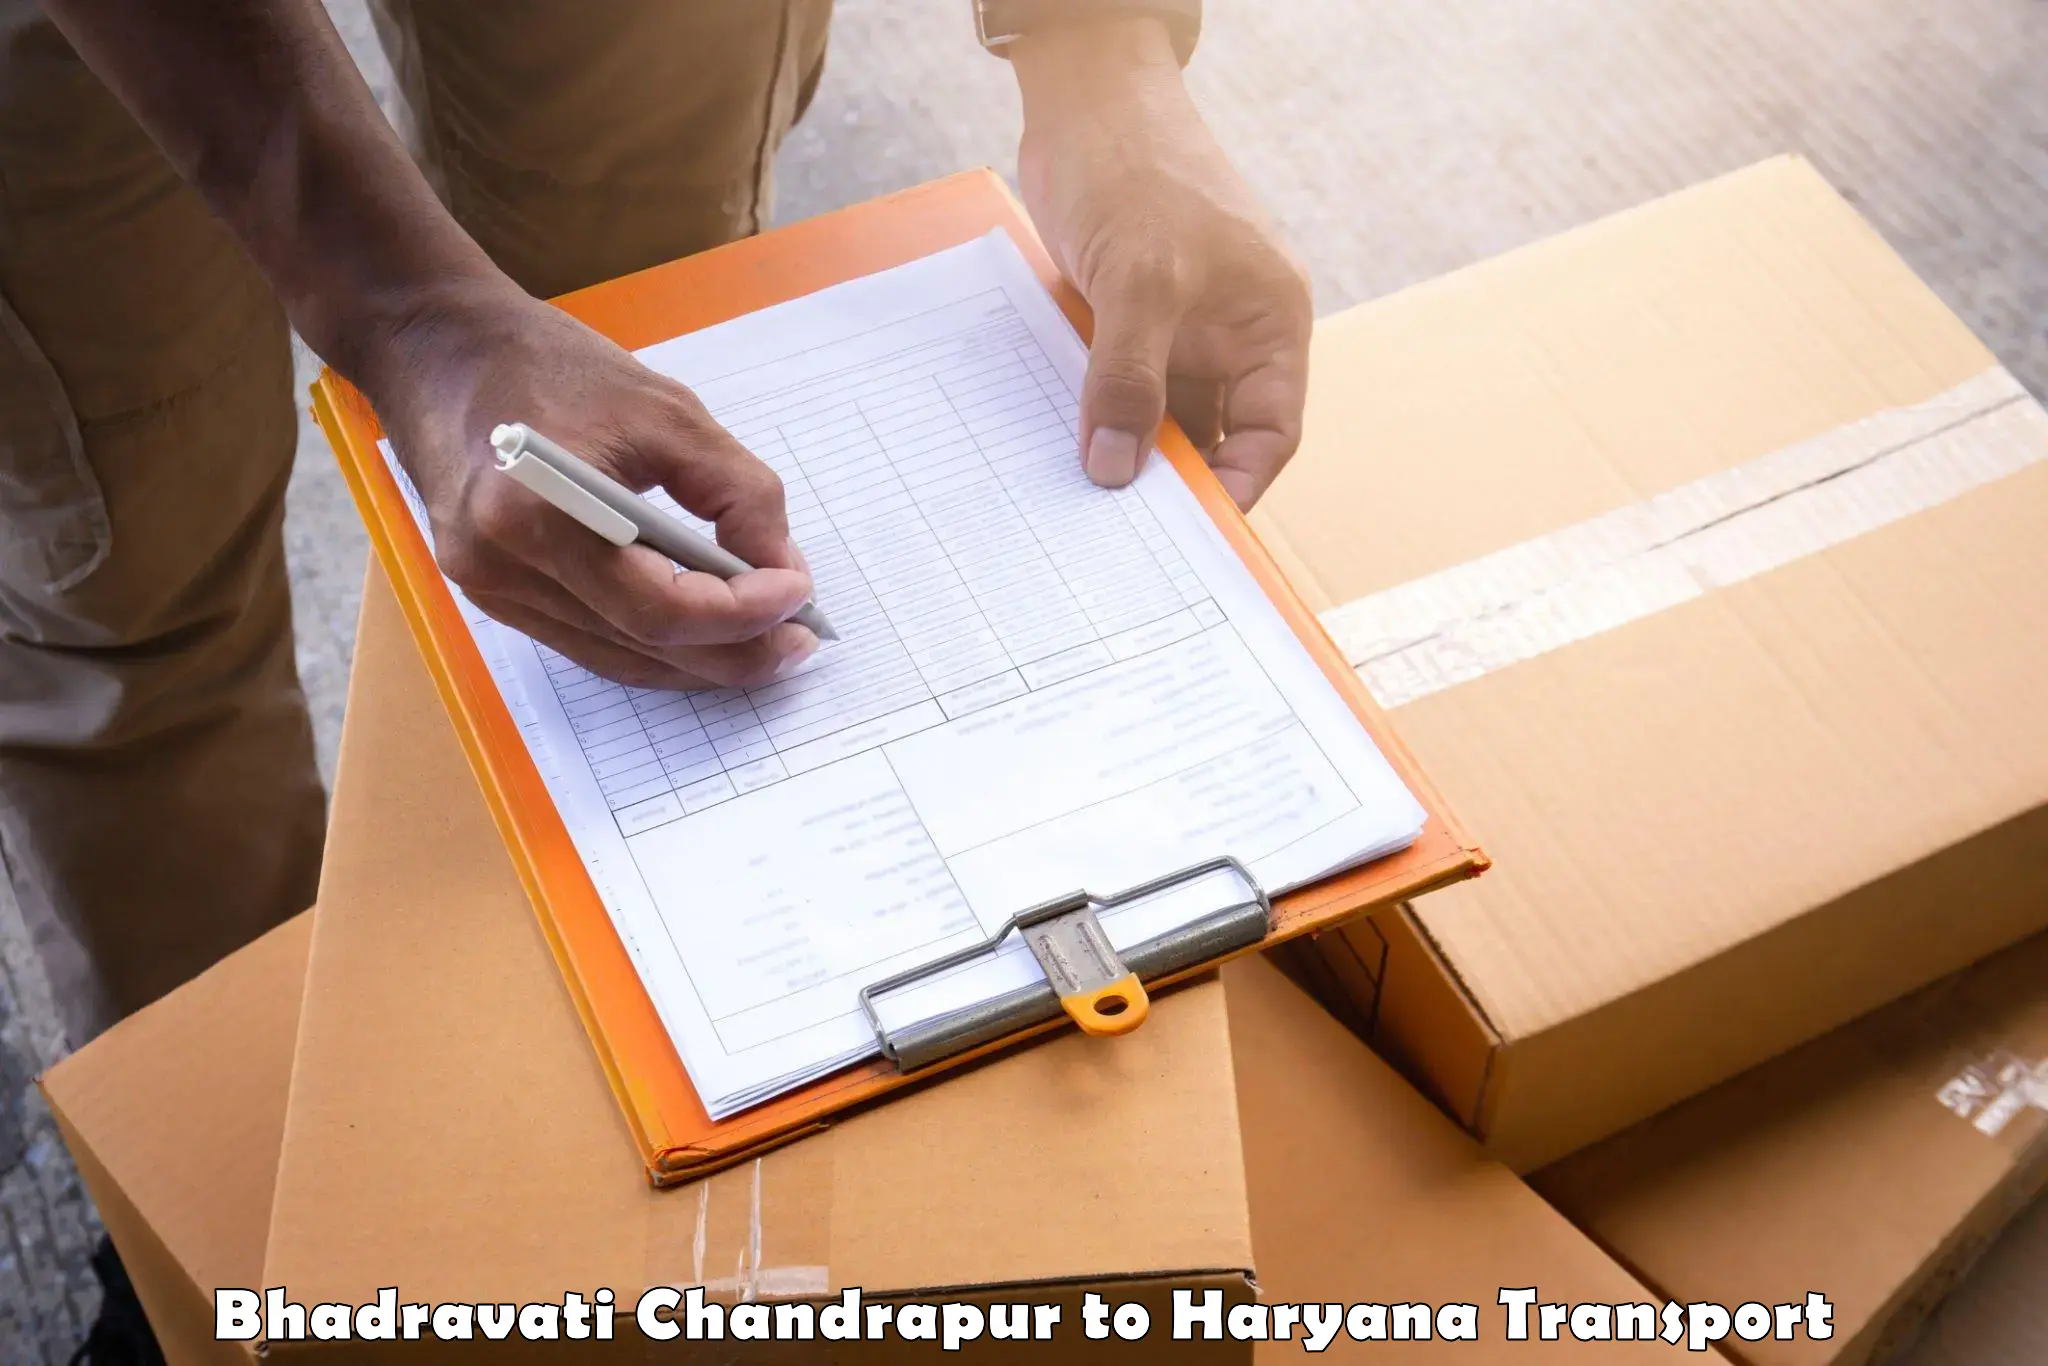 Air freight transport services in Bhadravati Chandrapur to Jind